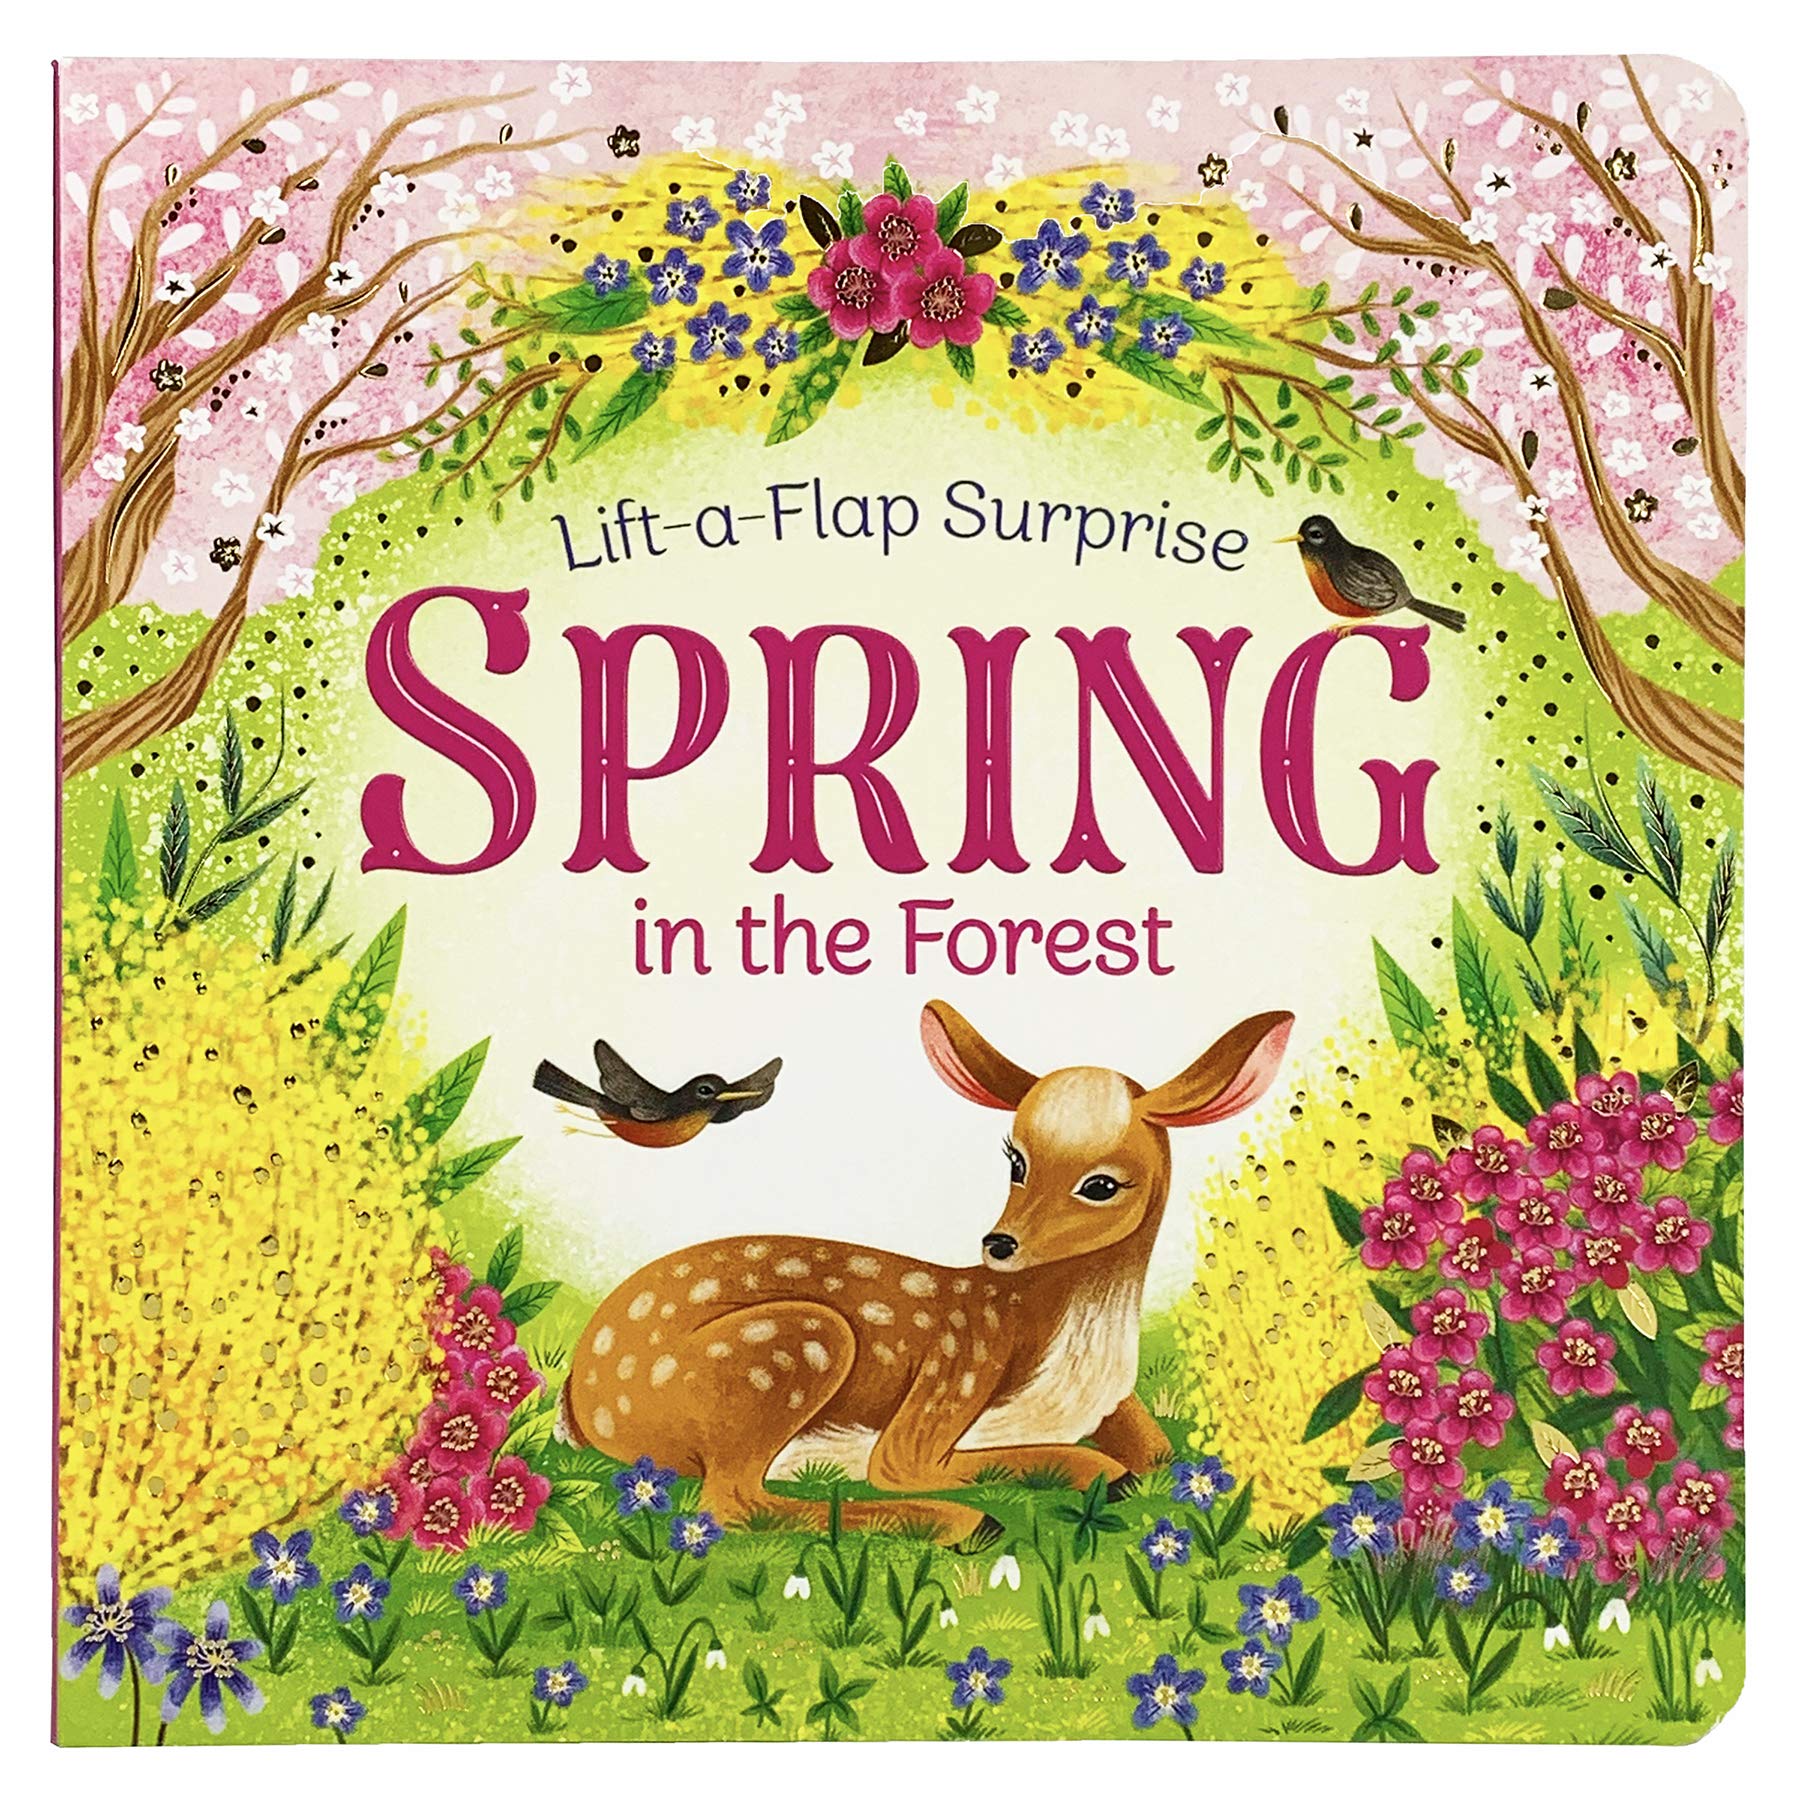 Spring In The Forest Deluxe Lift-a-Flap & Pop-Up Seasons Children's Board Book (Lift-a-flap Surprise) (Pop-Up Surprise)